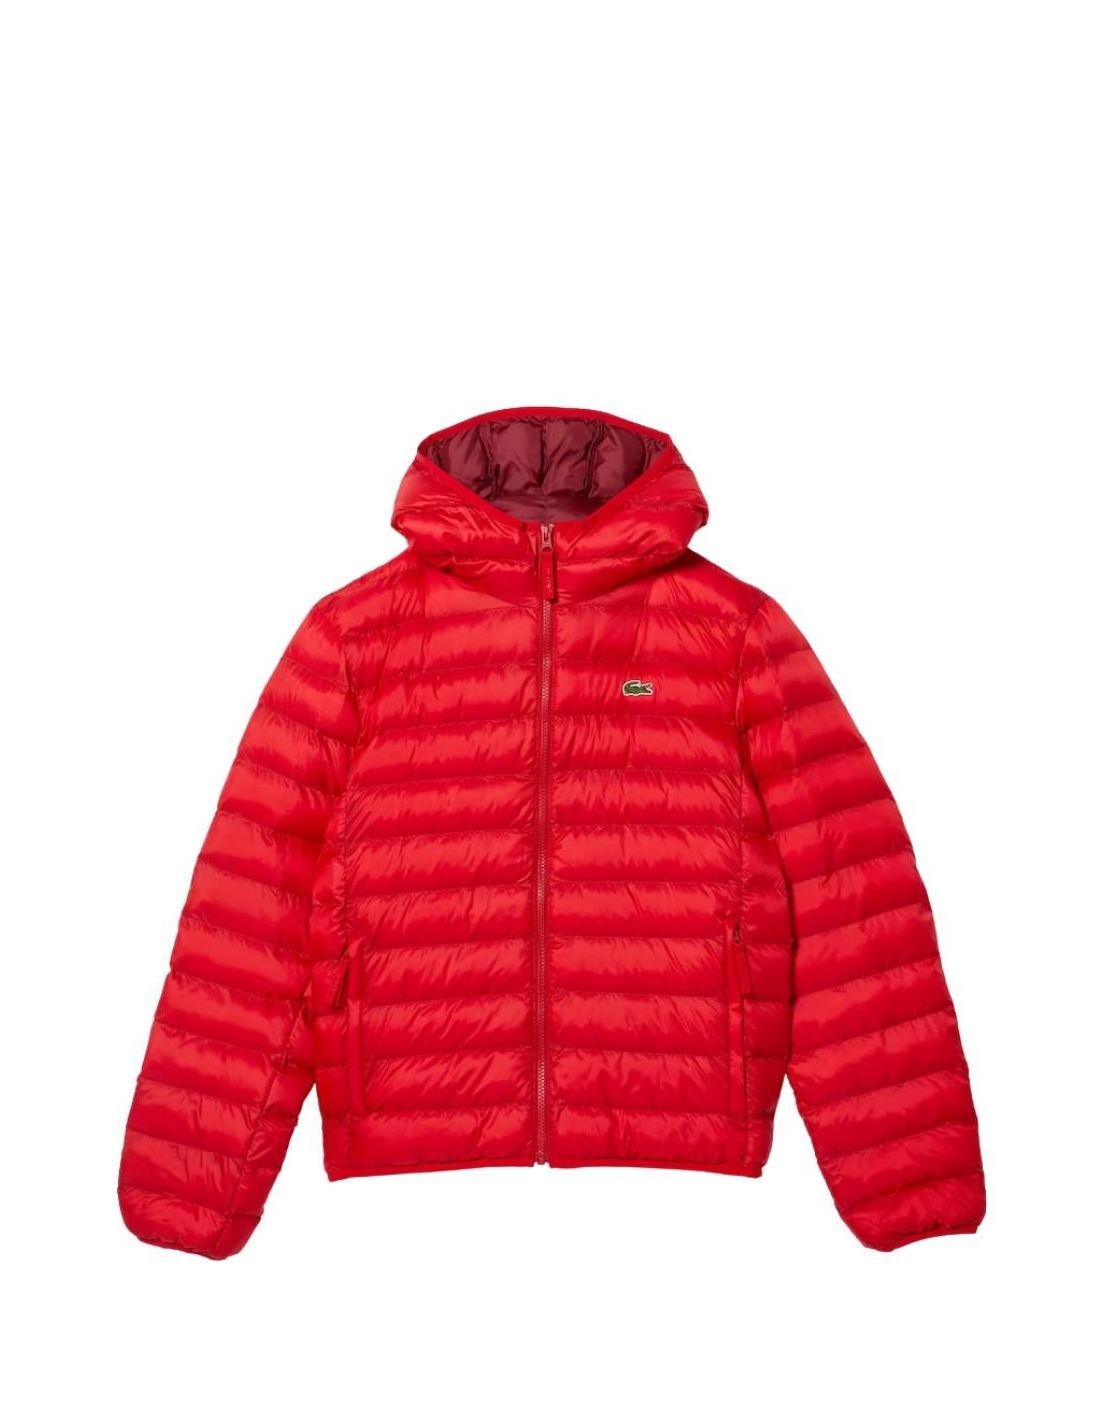 gilet lacoste rouge homme